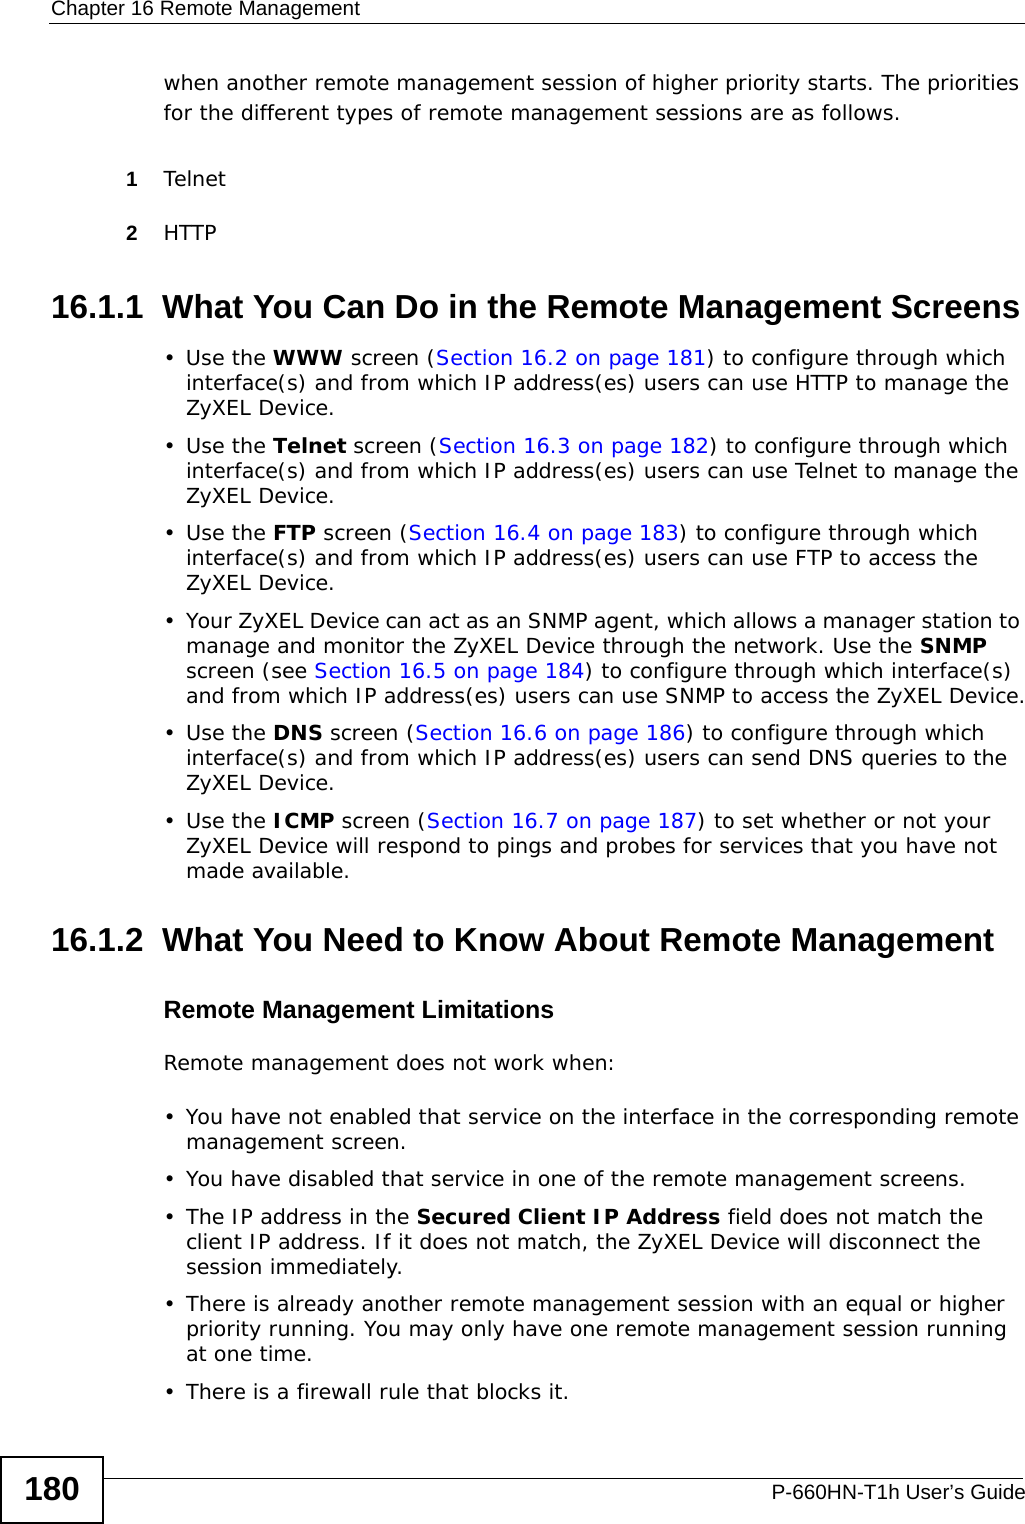 Chapter 16 Remote ManagementP-660HN-T1h User’s Guide180when another remote management session of higher priority starts. The priorities for the different types of remote management sessions are as follows.1Telnet2HTTP16.1.1  What You Can Do in the Remote Management Screens•Use the WWW screen (Section 16.2 on page 181) to configure through which interface(s) and from which IP address(es) users can use HTTP to manage the ZyXEL Device.•Use the Telnet screen (Section 16.3 on page 182) to configure through which interface(s) and from which IP address(es) users can use Telnet to manage the ZyXEL Device.•Use the FTP screen (Section 16.4 on page 183) to configure through which interface(s) and from which IP address(es) users can use FTP to access the ZyXEL Device.• Your ZyXEL Device can act as an SNMP agent, which allows a manager station to manage and monitor the ZyXEL Device through the network. Use the SNMP screen (see Section 16.5 on page 184) to configure through which interface(s) and from which IP address(es) users can use SNMP to access the ZyXEL Device.•Use the DNS screen (Section 16.6 on page 186) to configure through which interface(s) and from which IP address(es) users can send DNS queries to the ZyXEL Device.•Use the ICMP screen (Section 16.7 on page 187) to set whether or not your ZyXEL Device will respond to pings and probes for services that you have not made available.16.1.2  What You Need to Know About Remote ManagementRemote Management LimitationsRemote management does not work when:• You have not enabled that service on the interface in the corresponding remote management screen.• You have disabled that service in one of the remote management screens.• The IP address in the Secured Client IP Address field does not match the client IP address. If it does not match, the ZyXEL Device will disconnect the session immediately.• There is already another remote management session with an equal or higher priority running. You may only have one remote management session running at one time.• There is a firewall rule that blocks it.